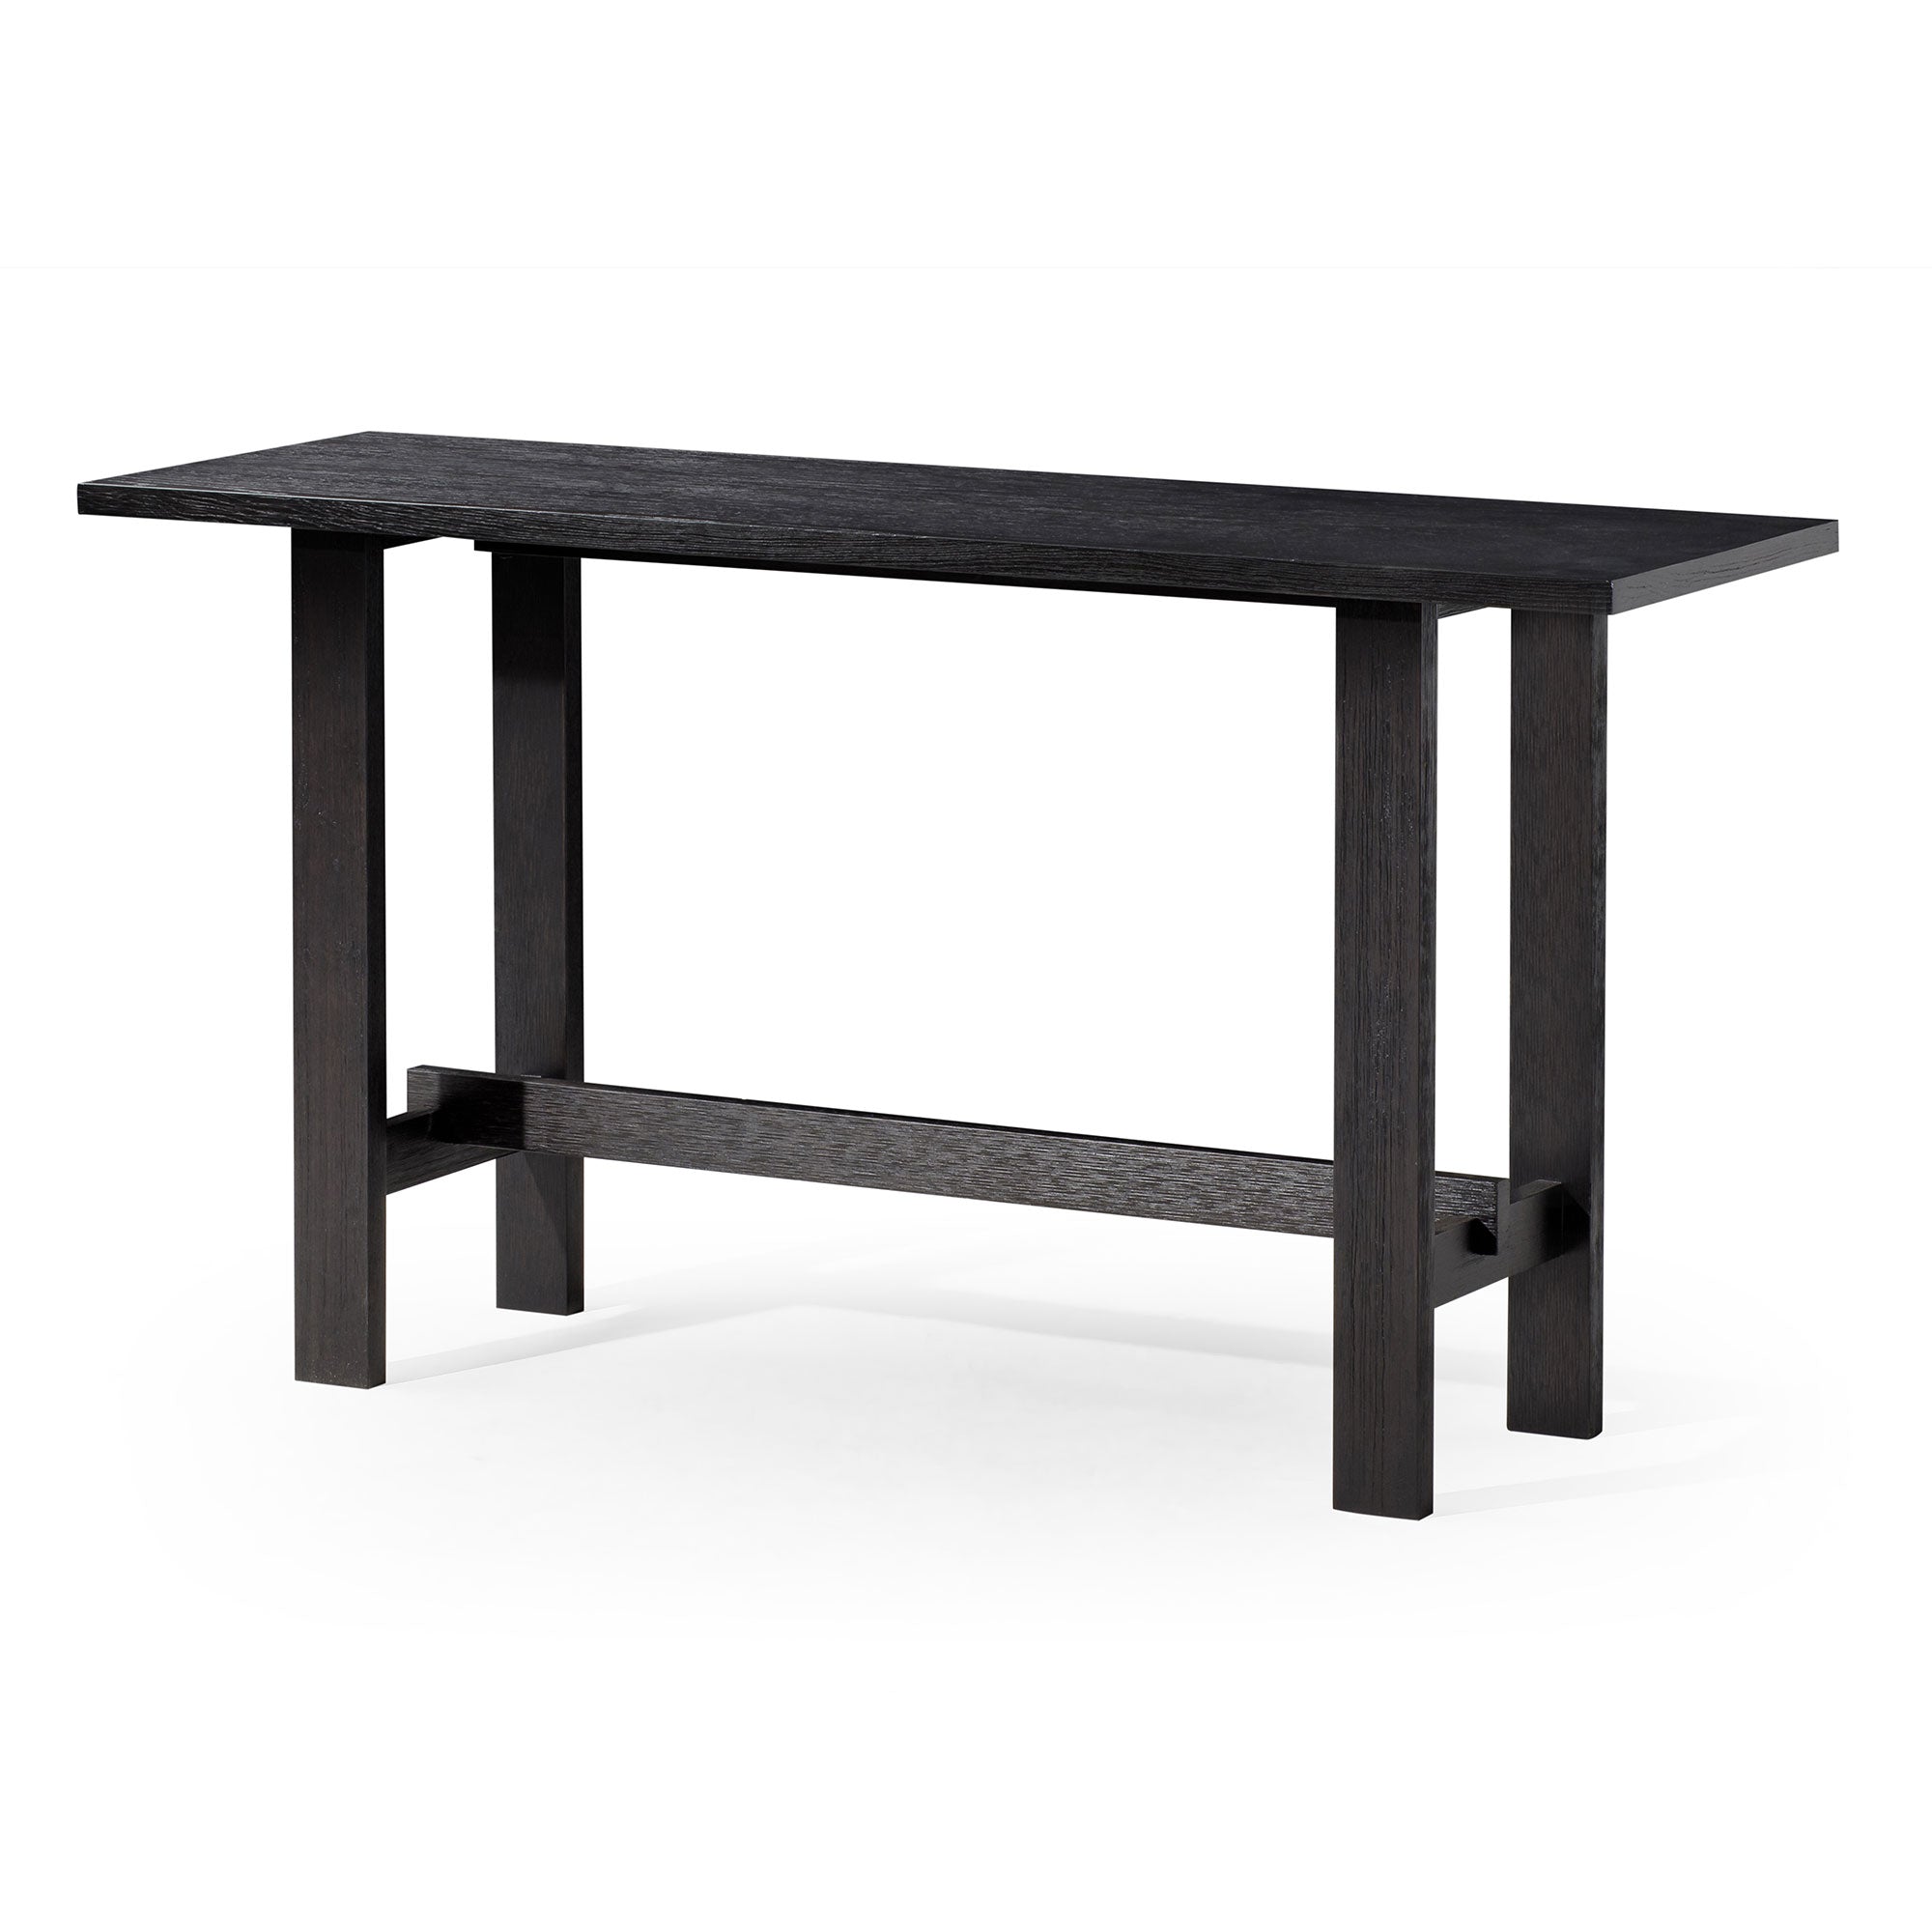 Hera Modern Wooden Console Table in Weathered Black Finish